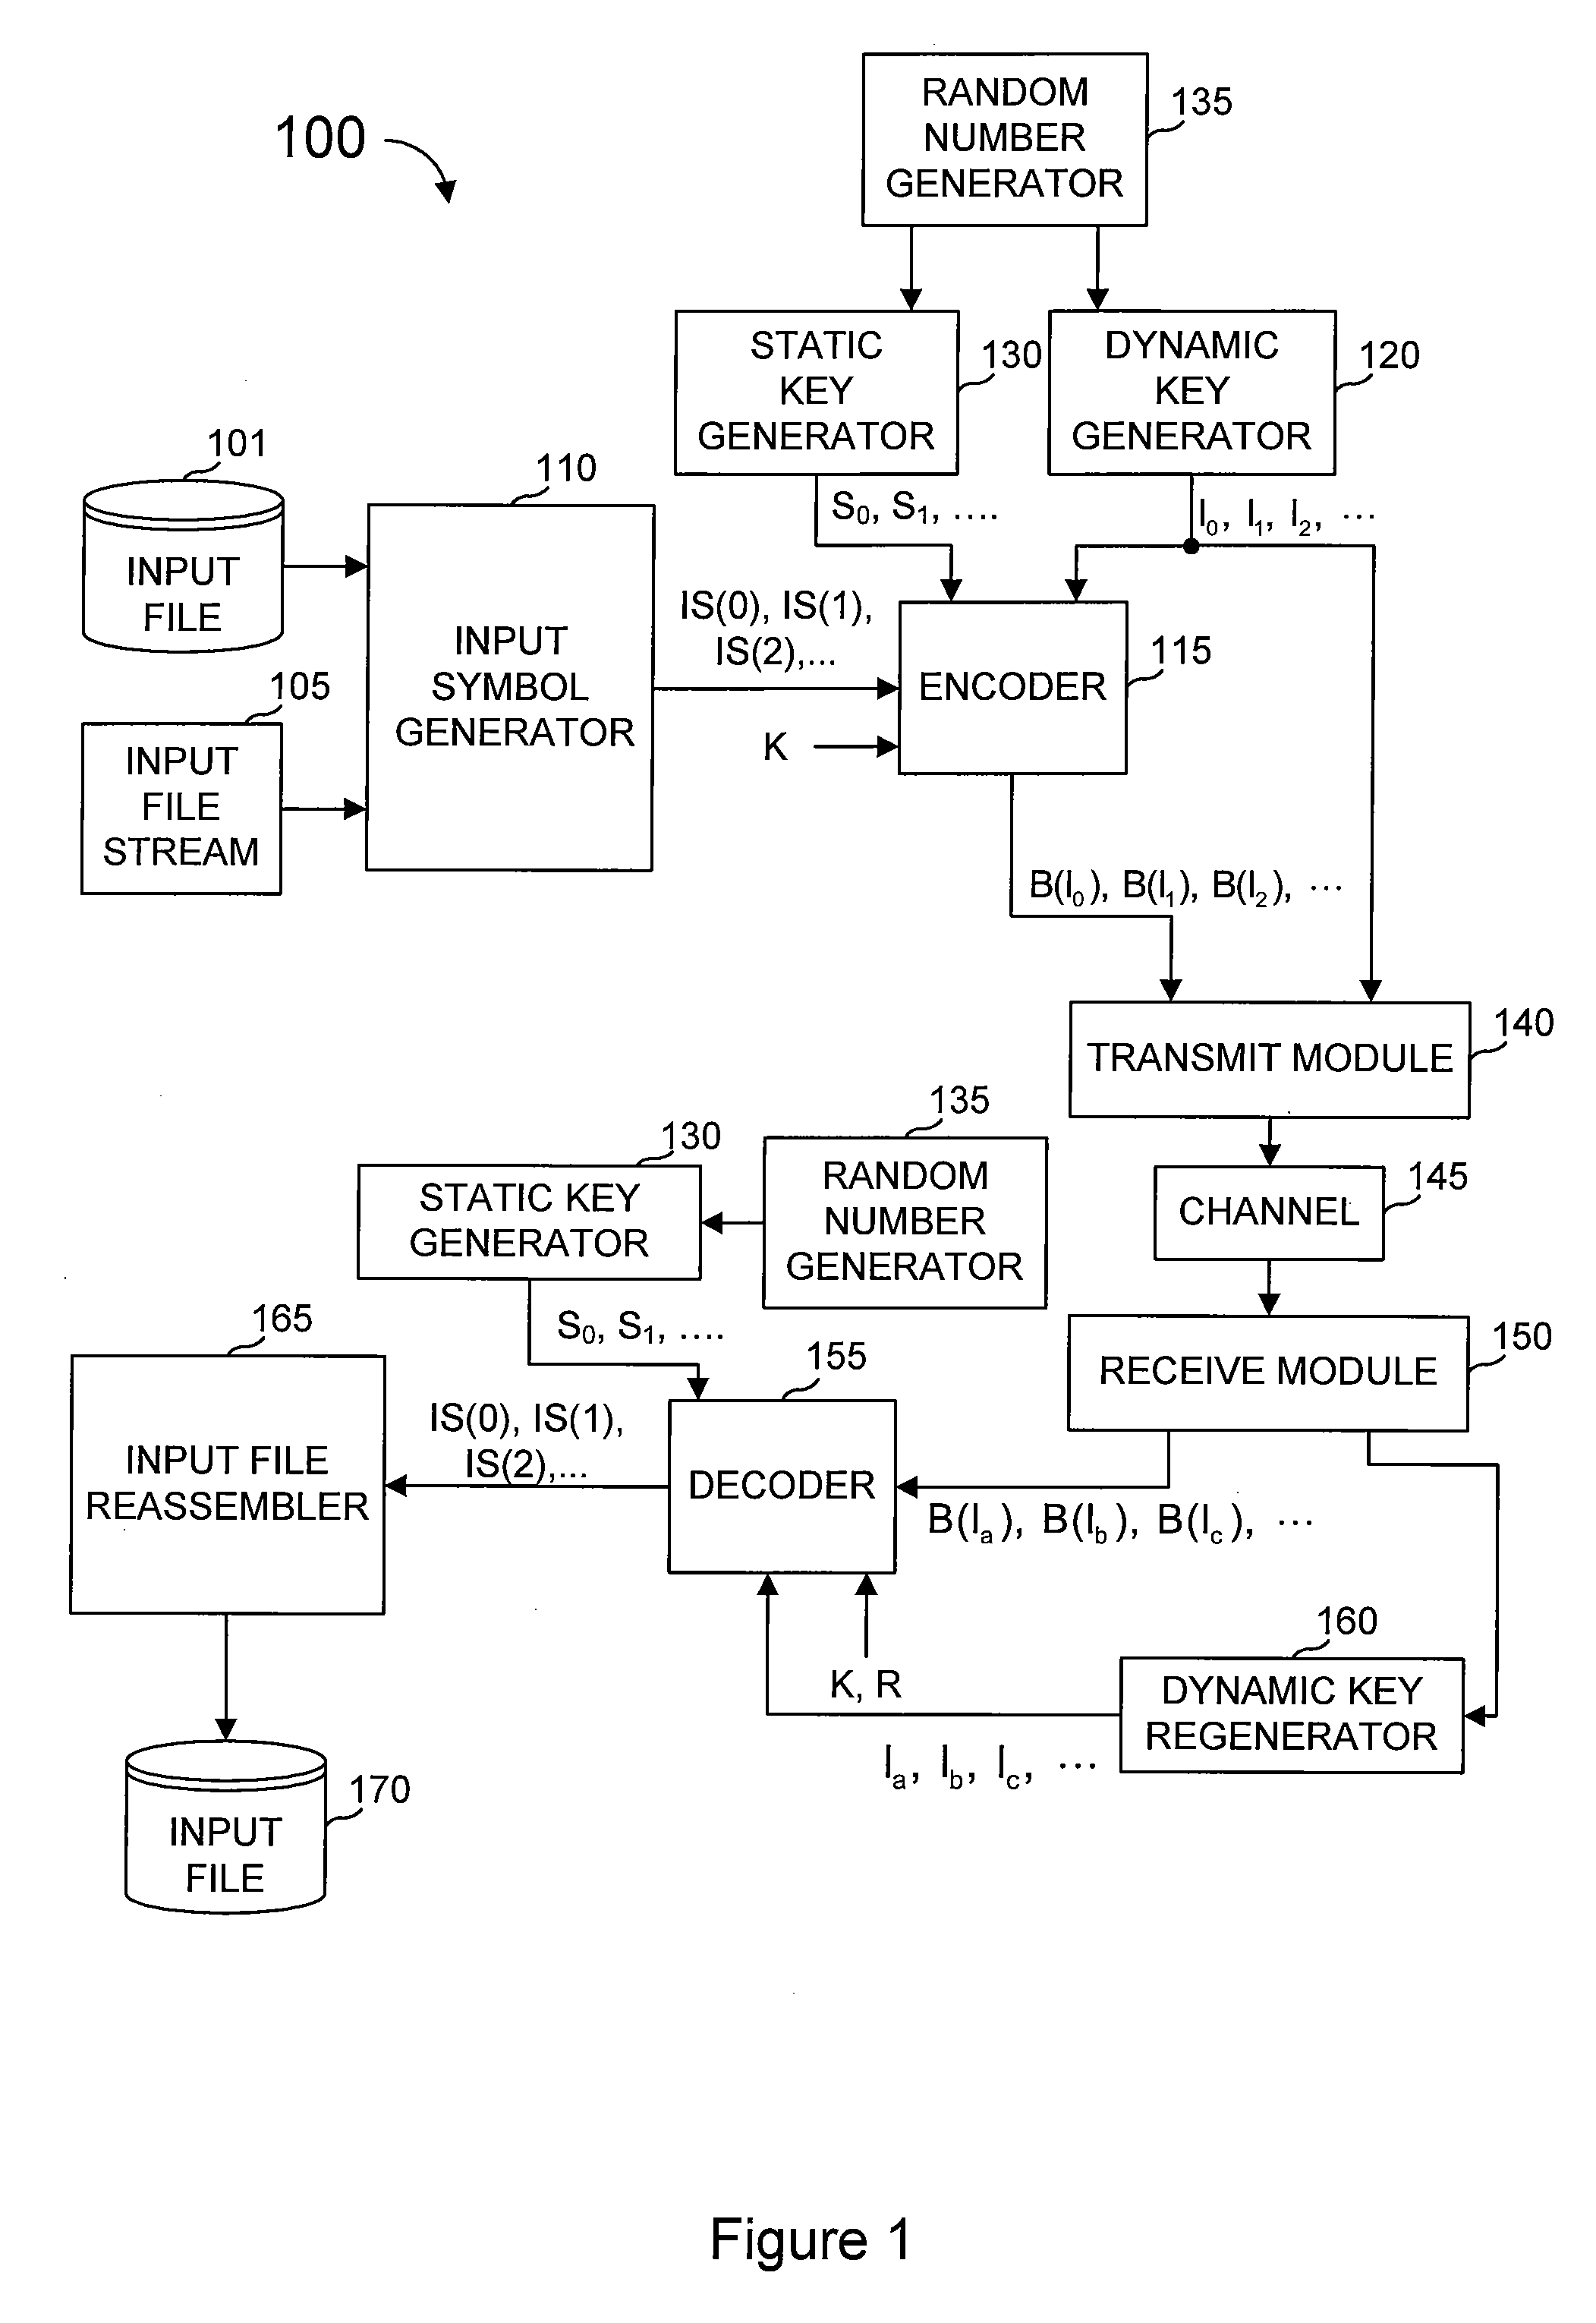 Multiple-field based code generator and decoder for communications systems